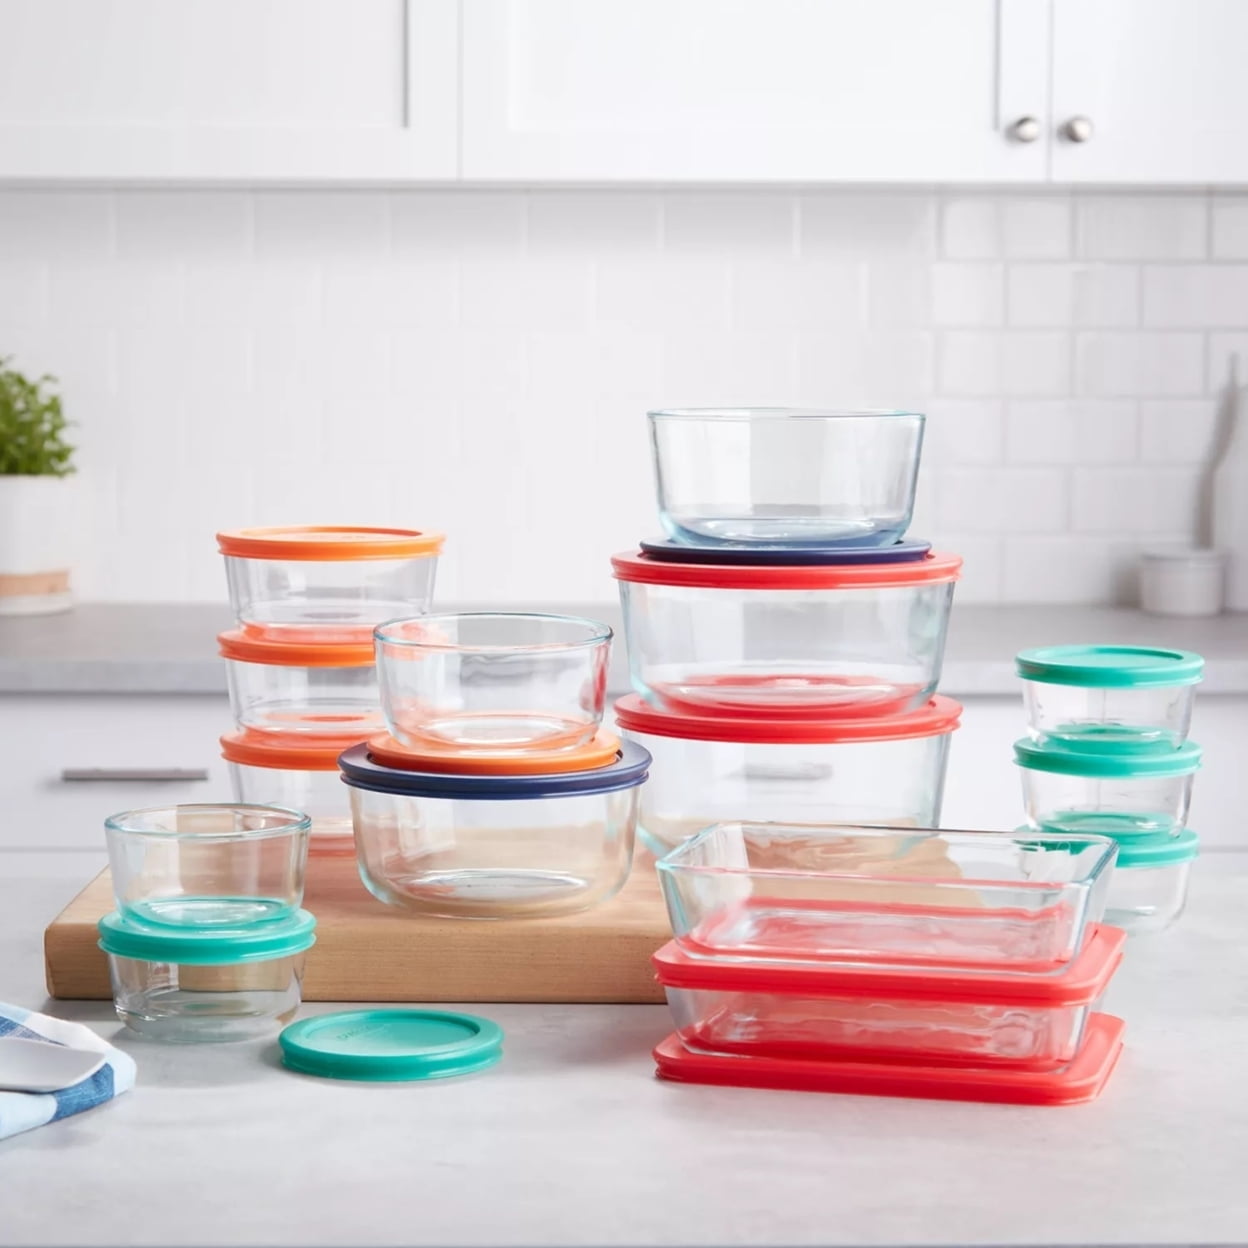 Pyrex (3) Glass Food Storage Bowls and (3) Red Lids for 7200, 7201, and  7203